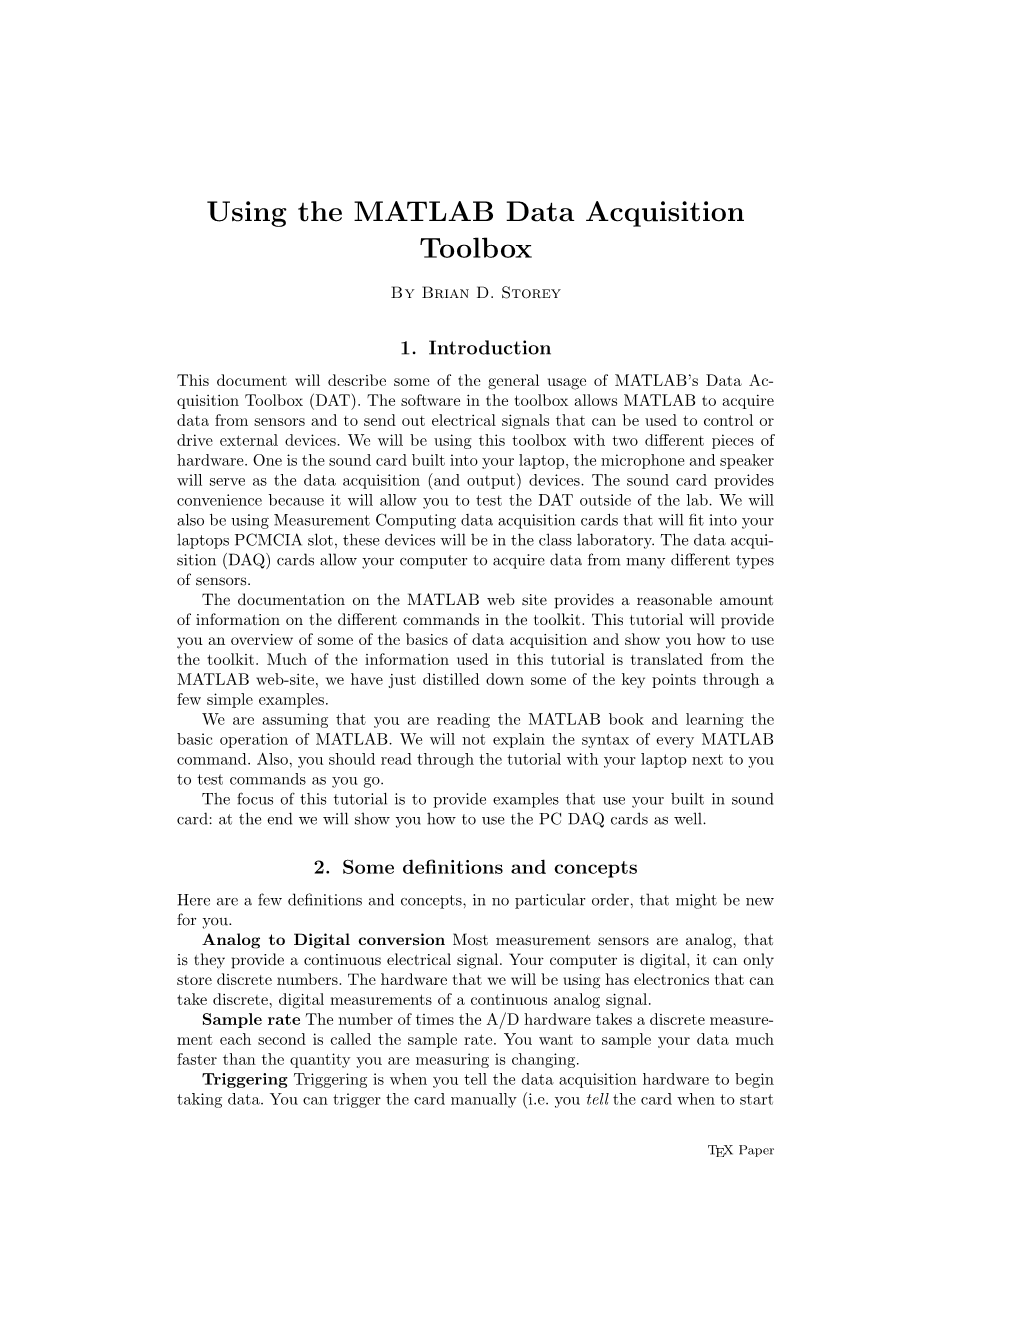 Using the MATLAB Data Acquisition Toolbox